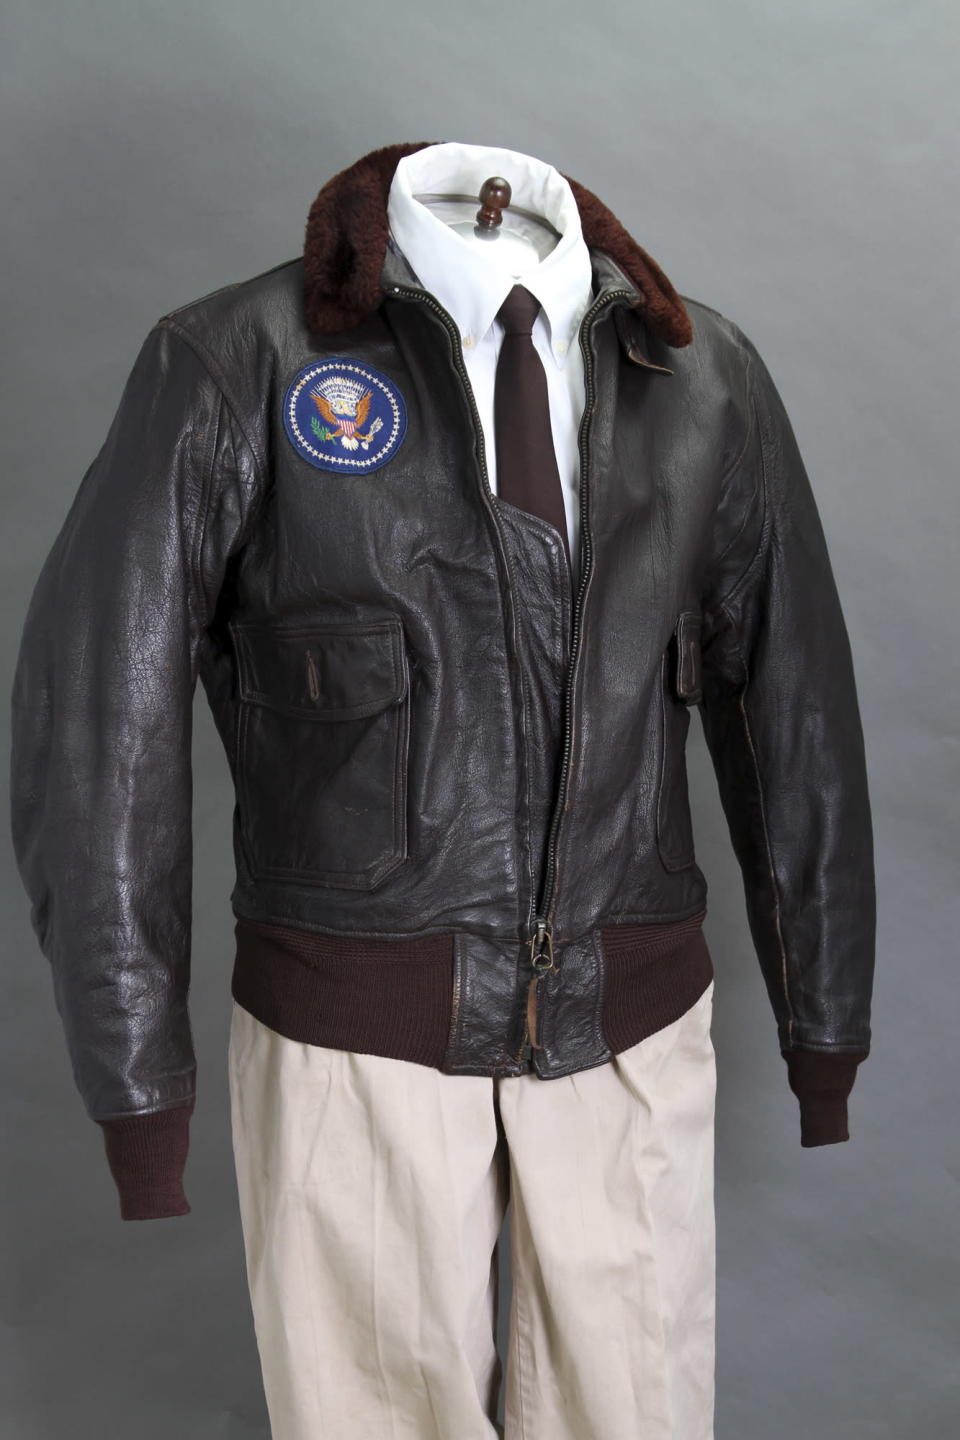 JFK's Air Force One Bomber Jacket sold at auction